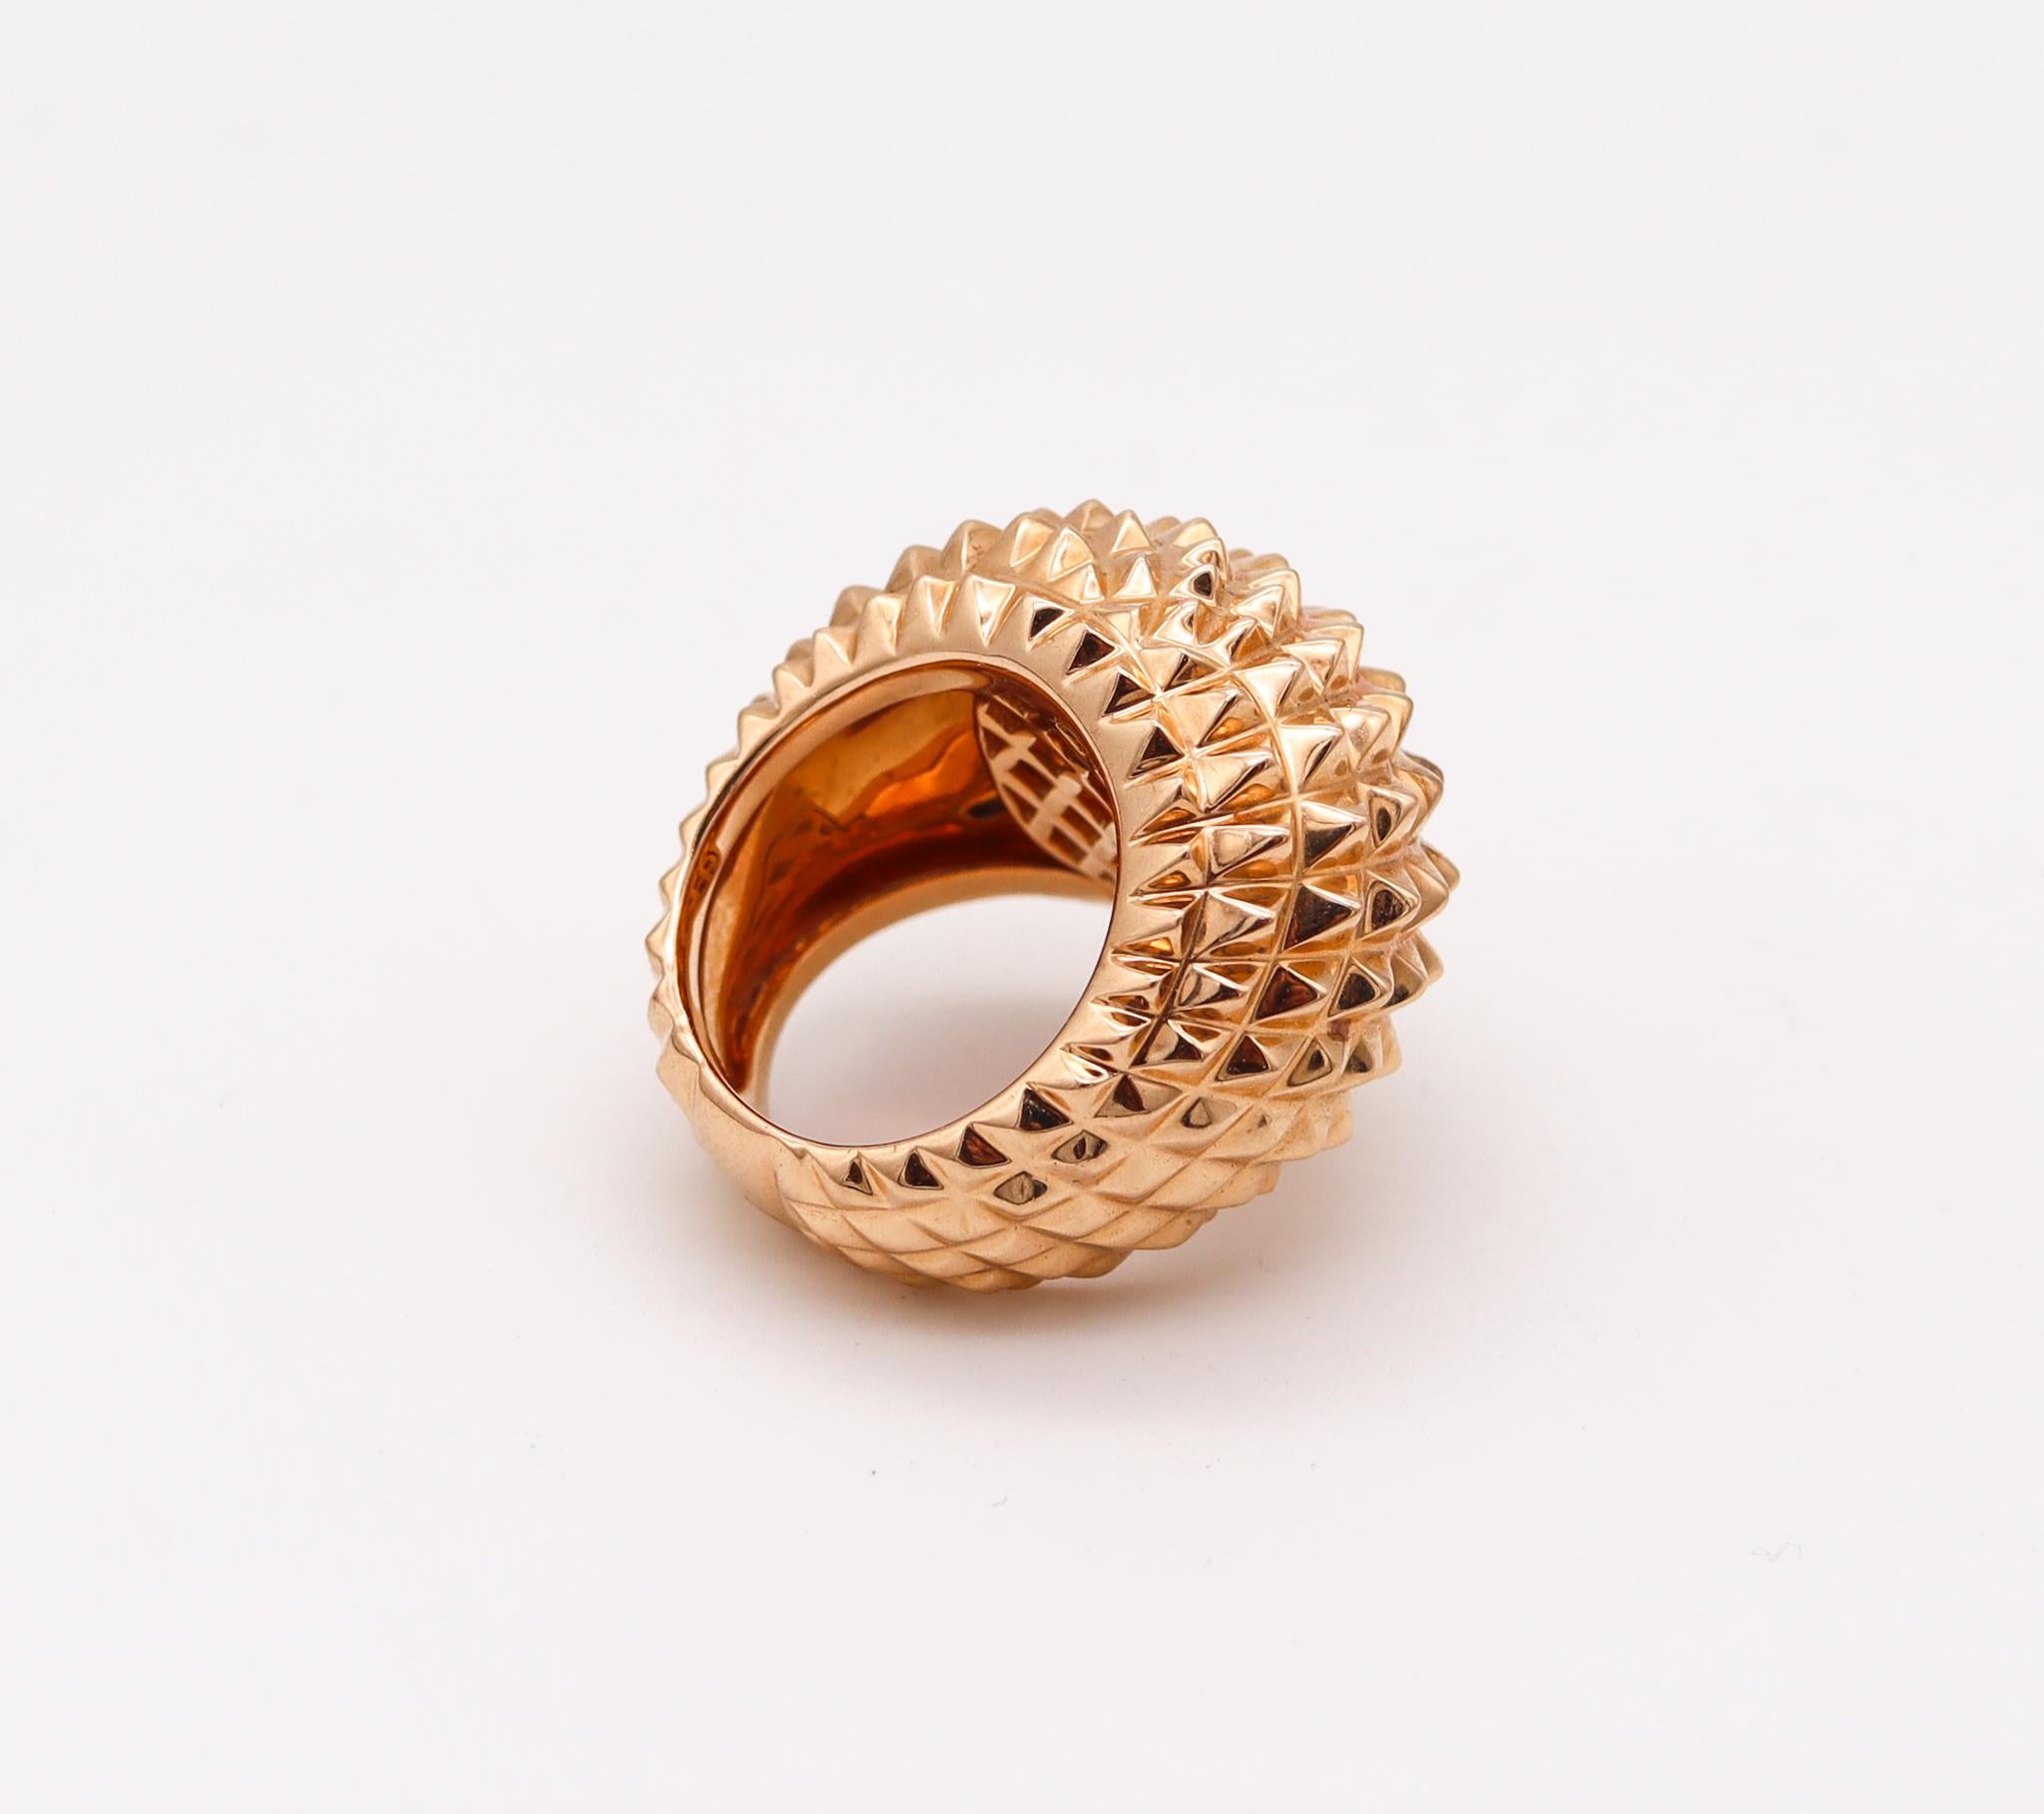 Modern Boucheron Paris Textured Porcupine Ring in 18Kt Yellow Gold with Two Rubies